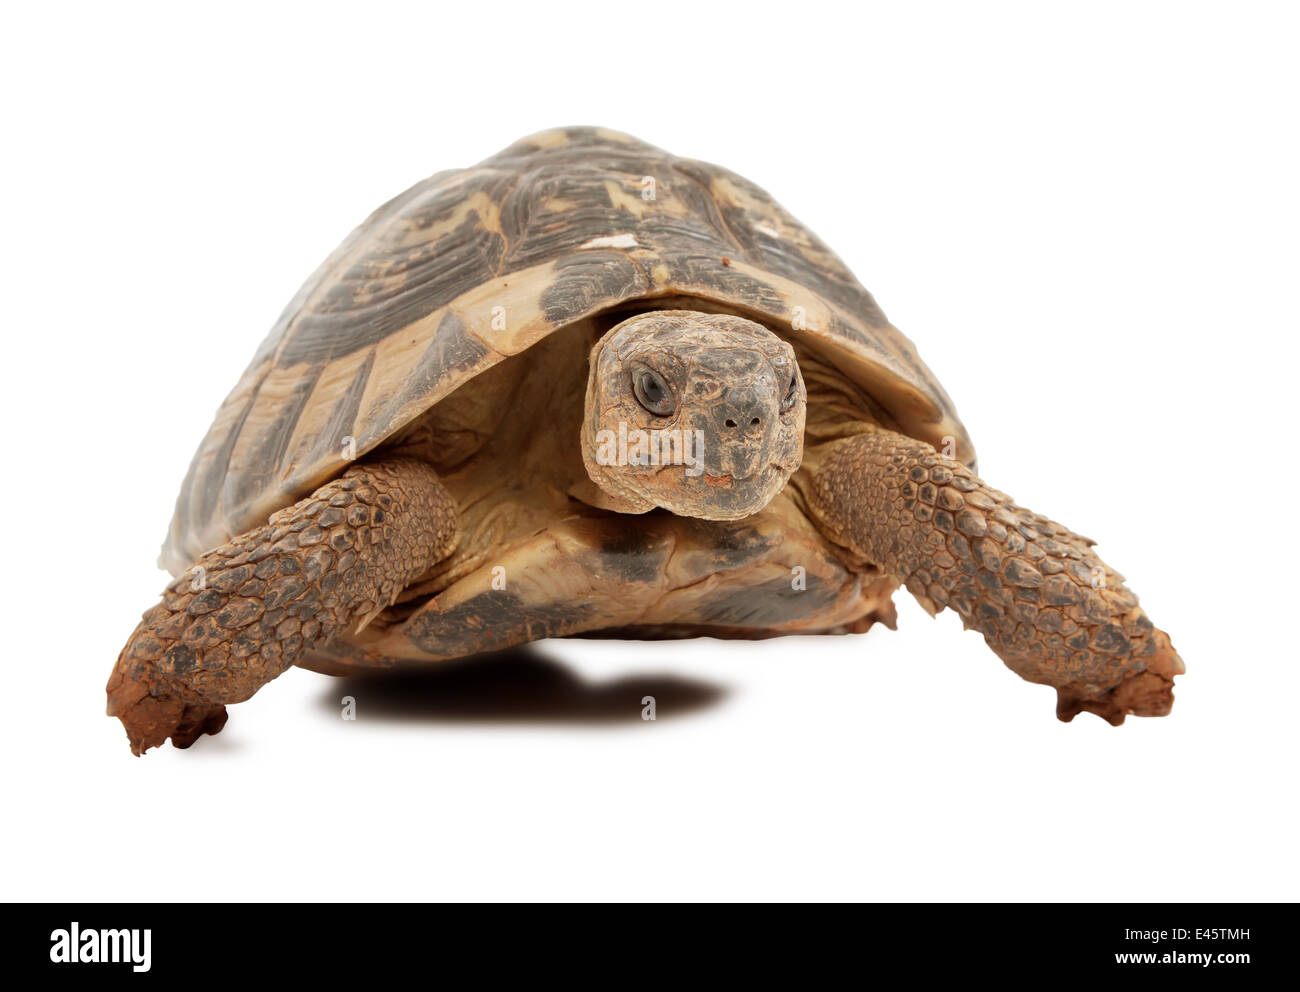 turtle isolated on white background, focus on turtle head Stock Photo